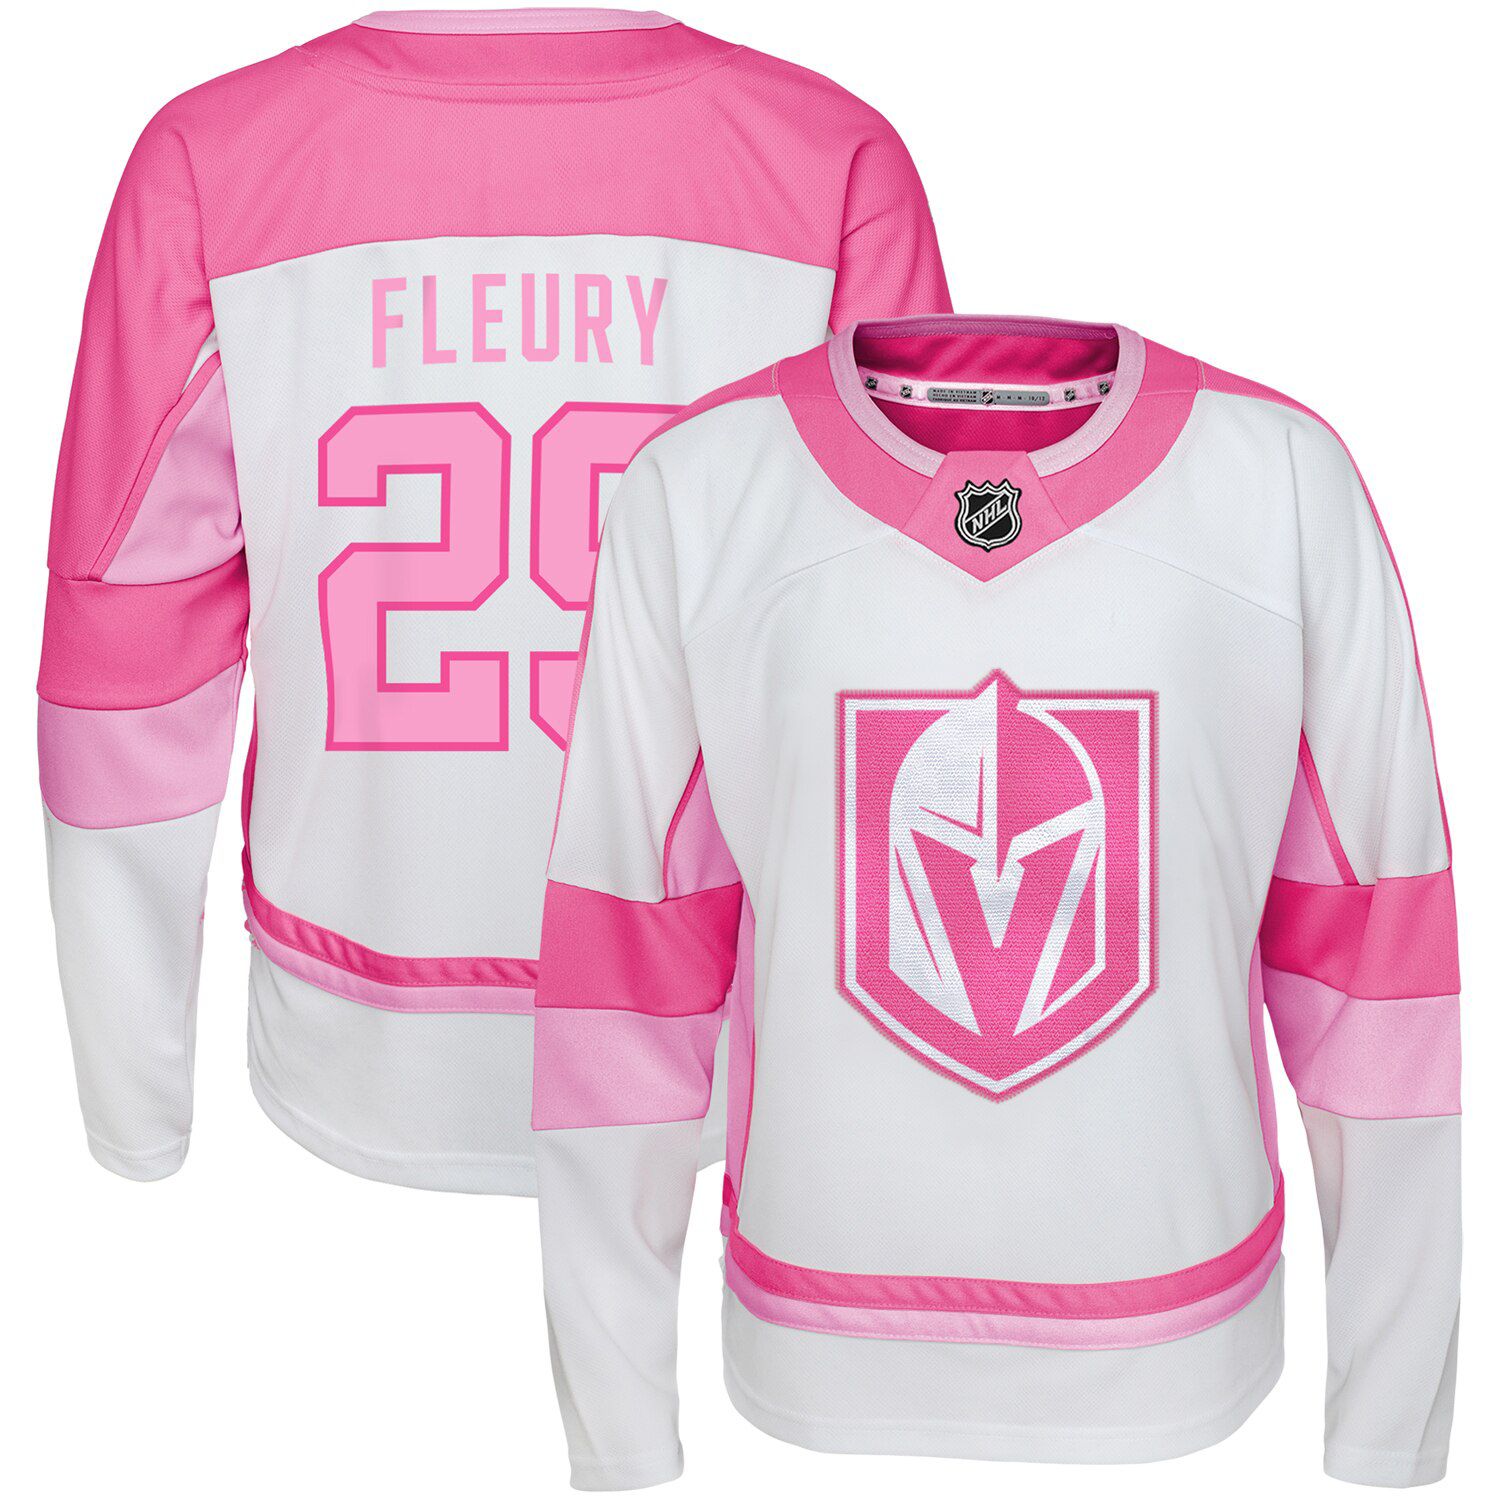 fleury jersey youth